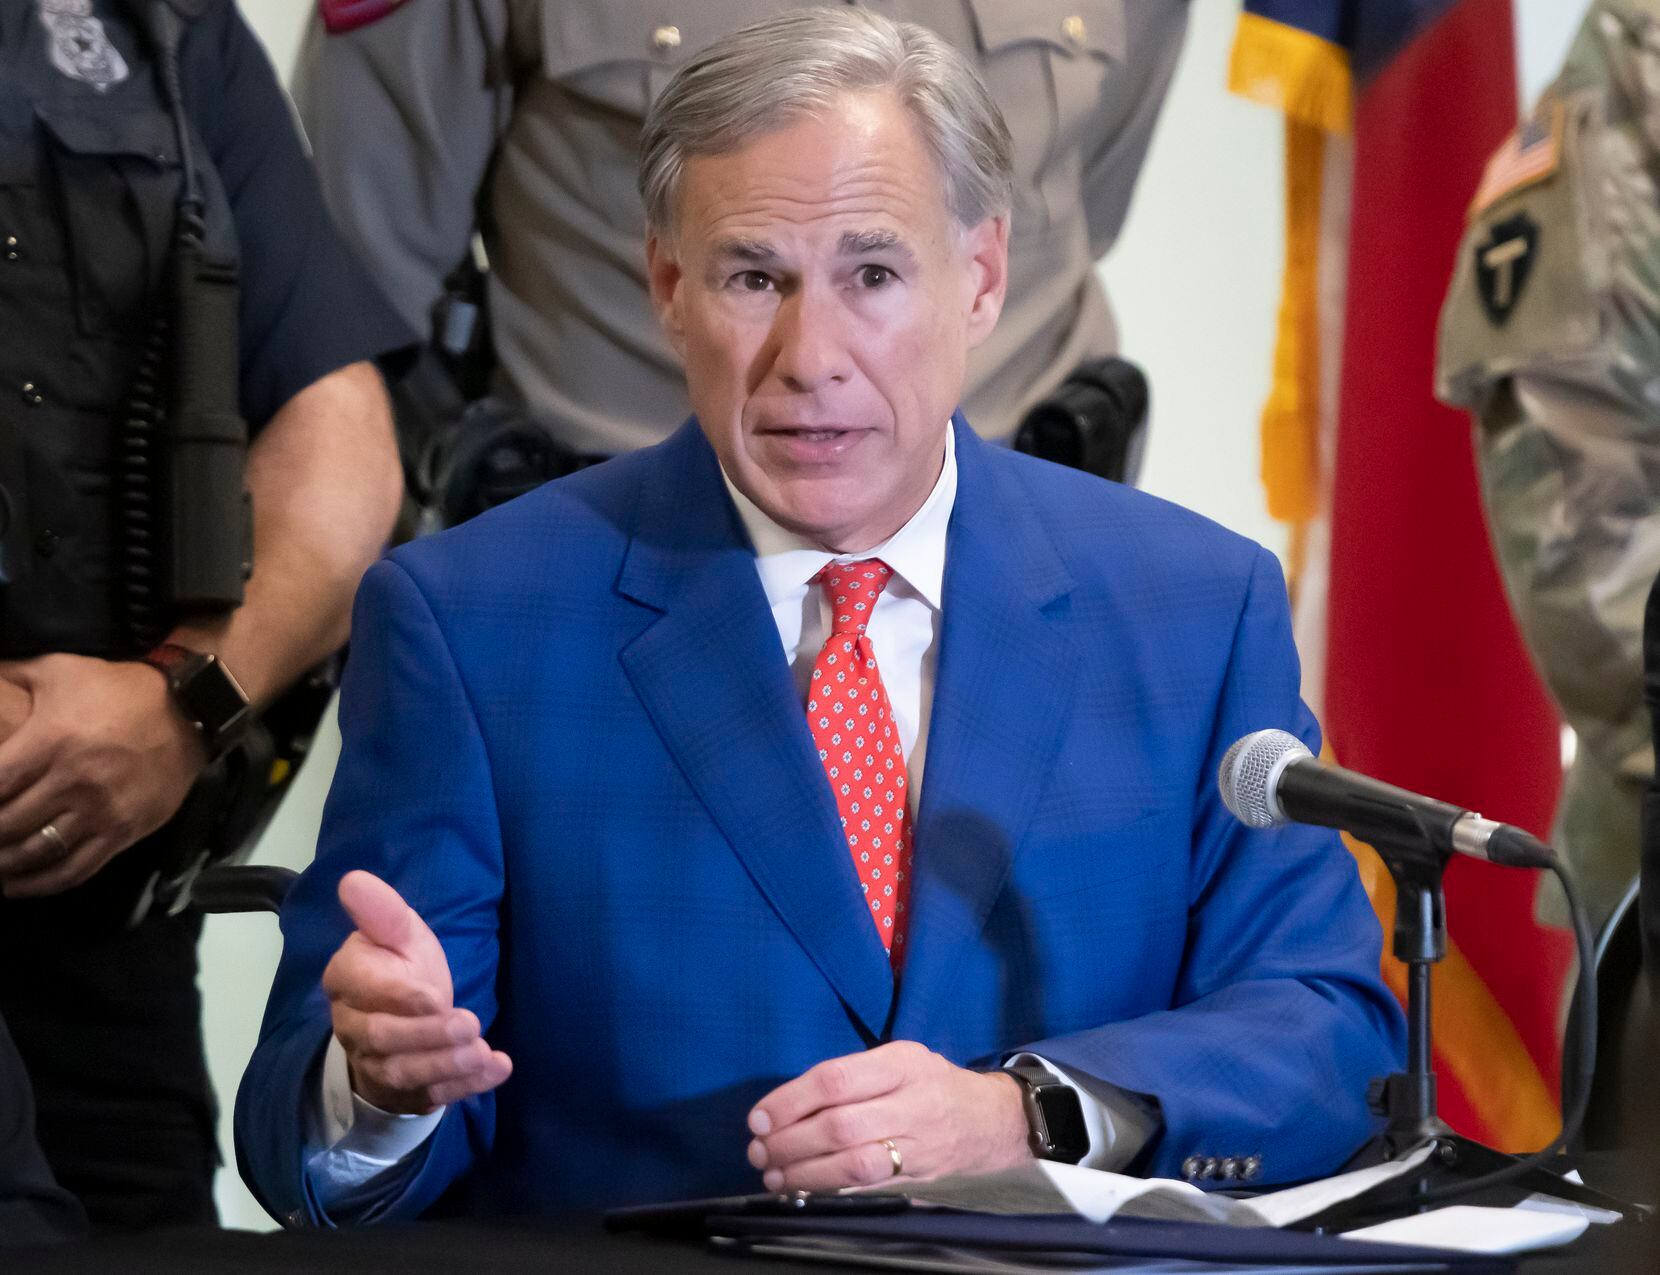 Texas Governor Greg Abbott answers a question following the enactment of HB9 during a press conference at the Fort Worth Police Officers Association Headquarters, Friday, September 17, 2021 (Robert W. Hart / Special Contributor)